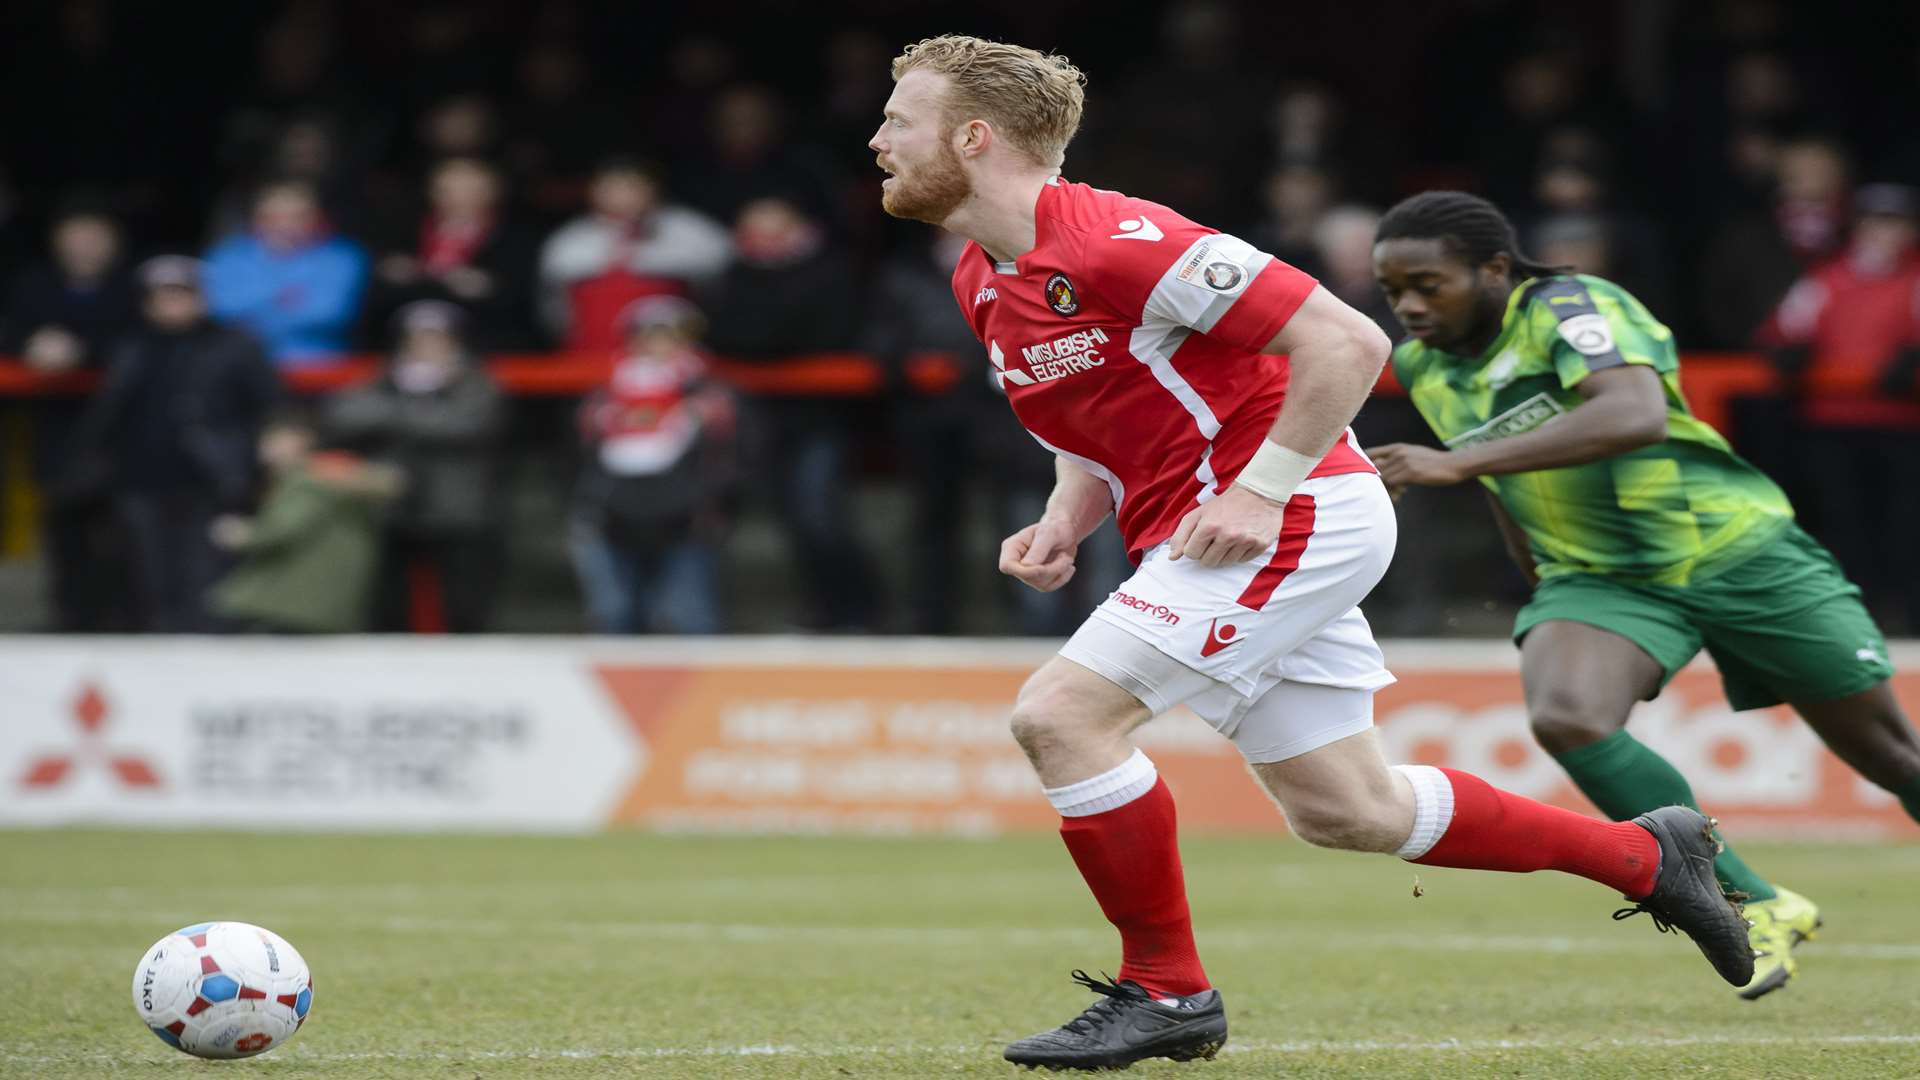 Kenny Clark brings the ball out of defence for Ebbsfleet against Hemel Picture: Andy Payton